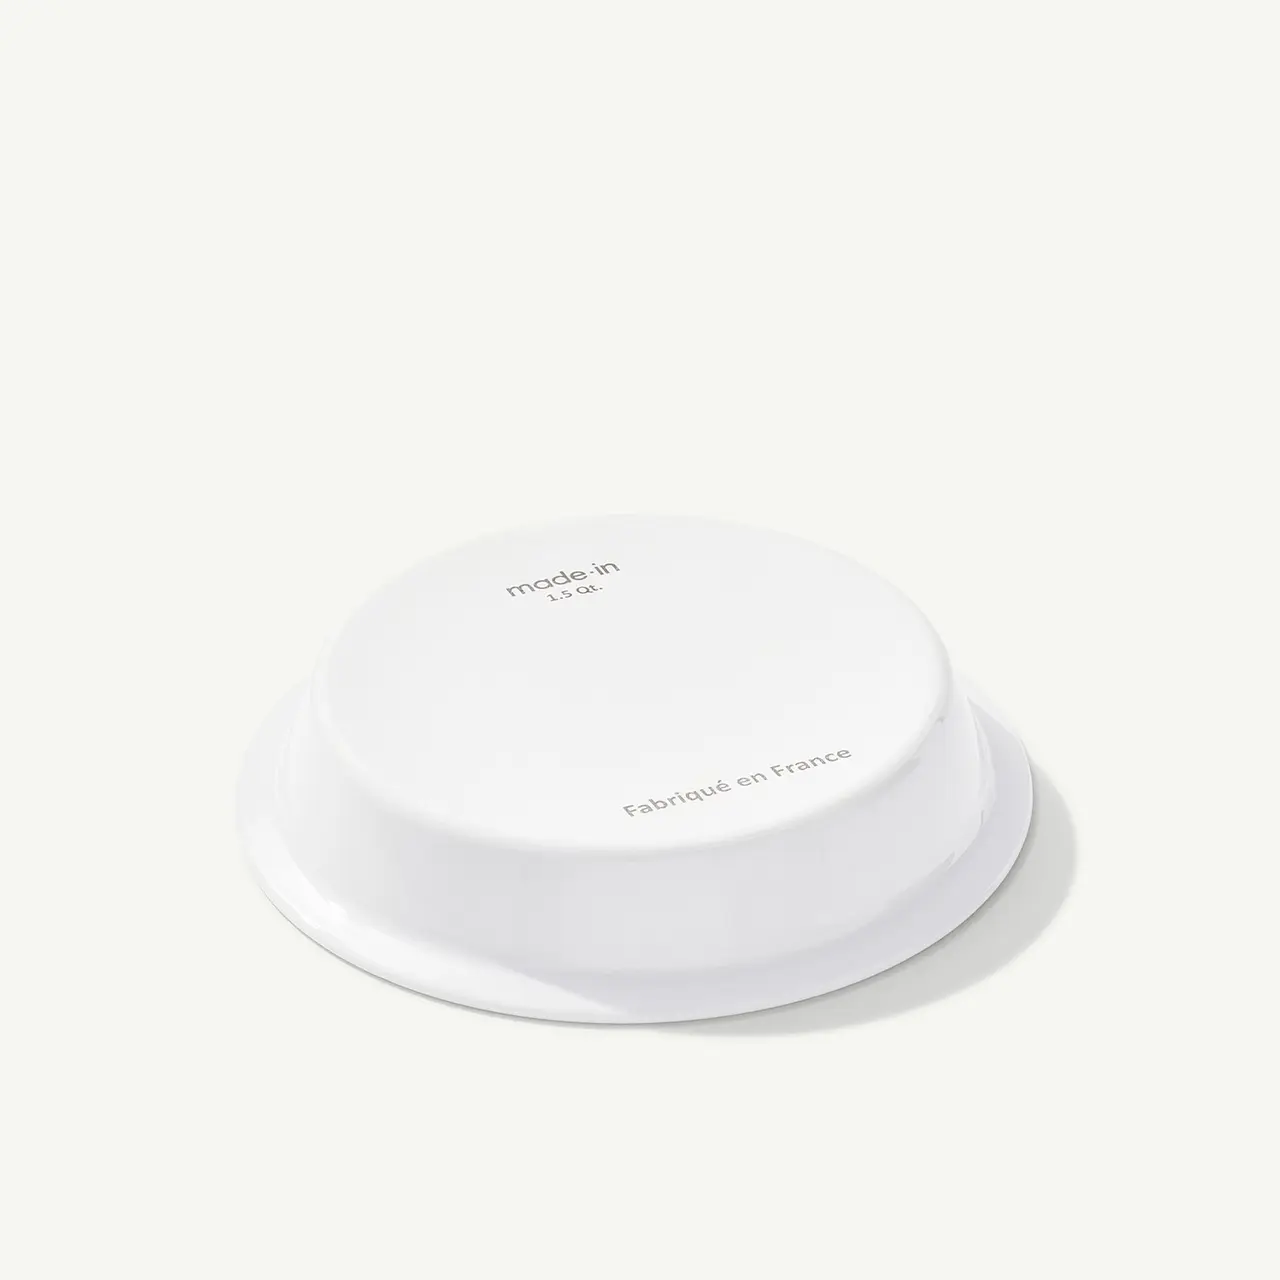 A minimalist white wireless charger with centered text on a plain background.